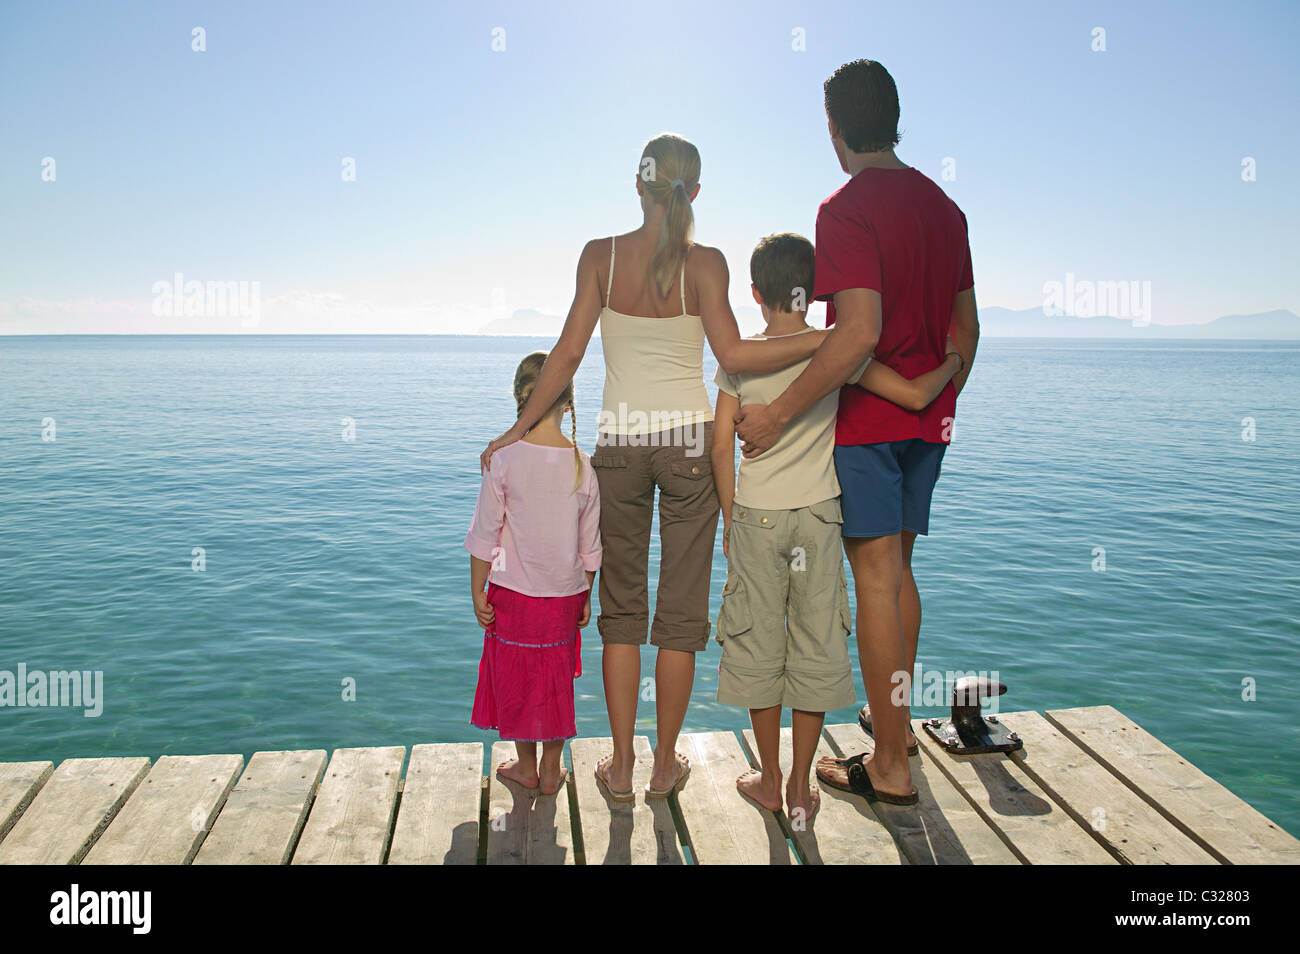 Rear view of family standing on jetty Stock Photo